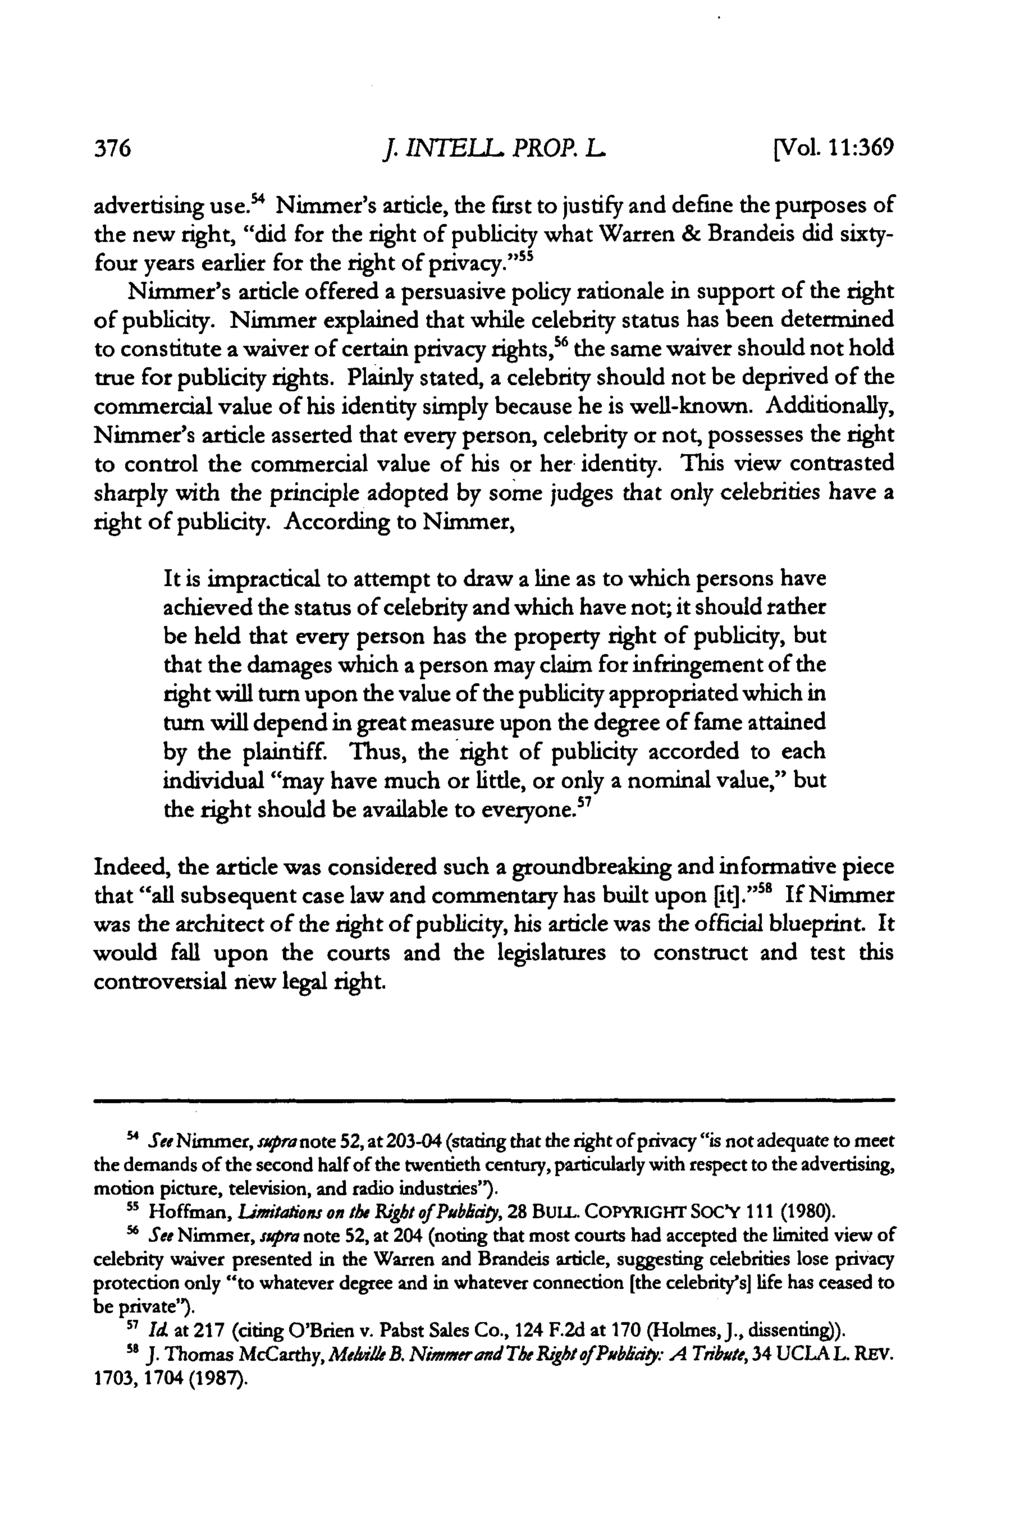 Journal of Intellectual Property Law, Vol. 11, Iss. 2 [2004], Art. 6 J. INTELL PROP. L [Vol. 11:369 advertising use.